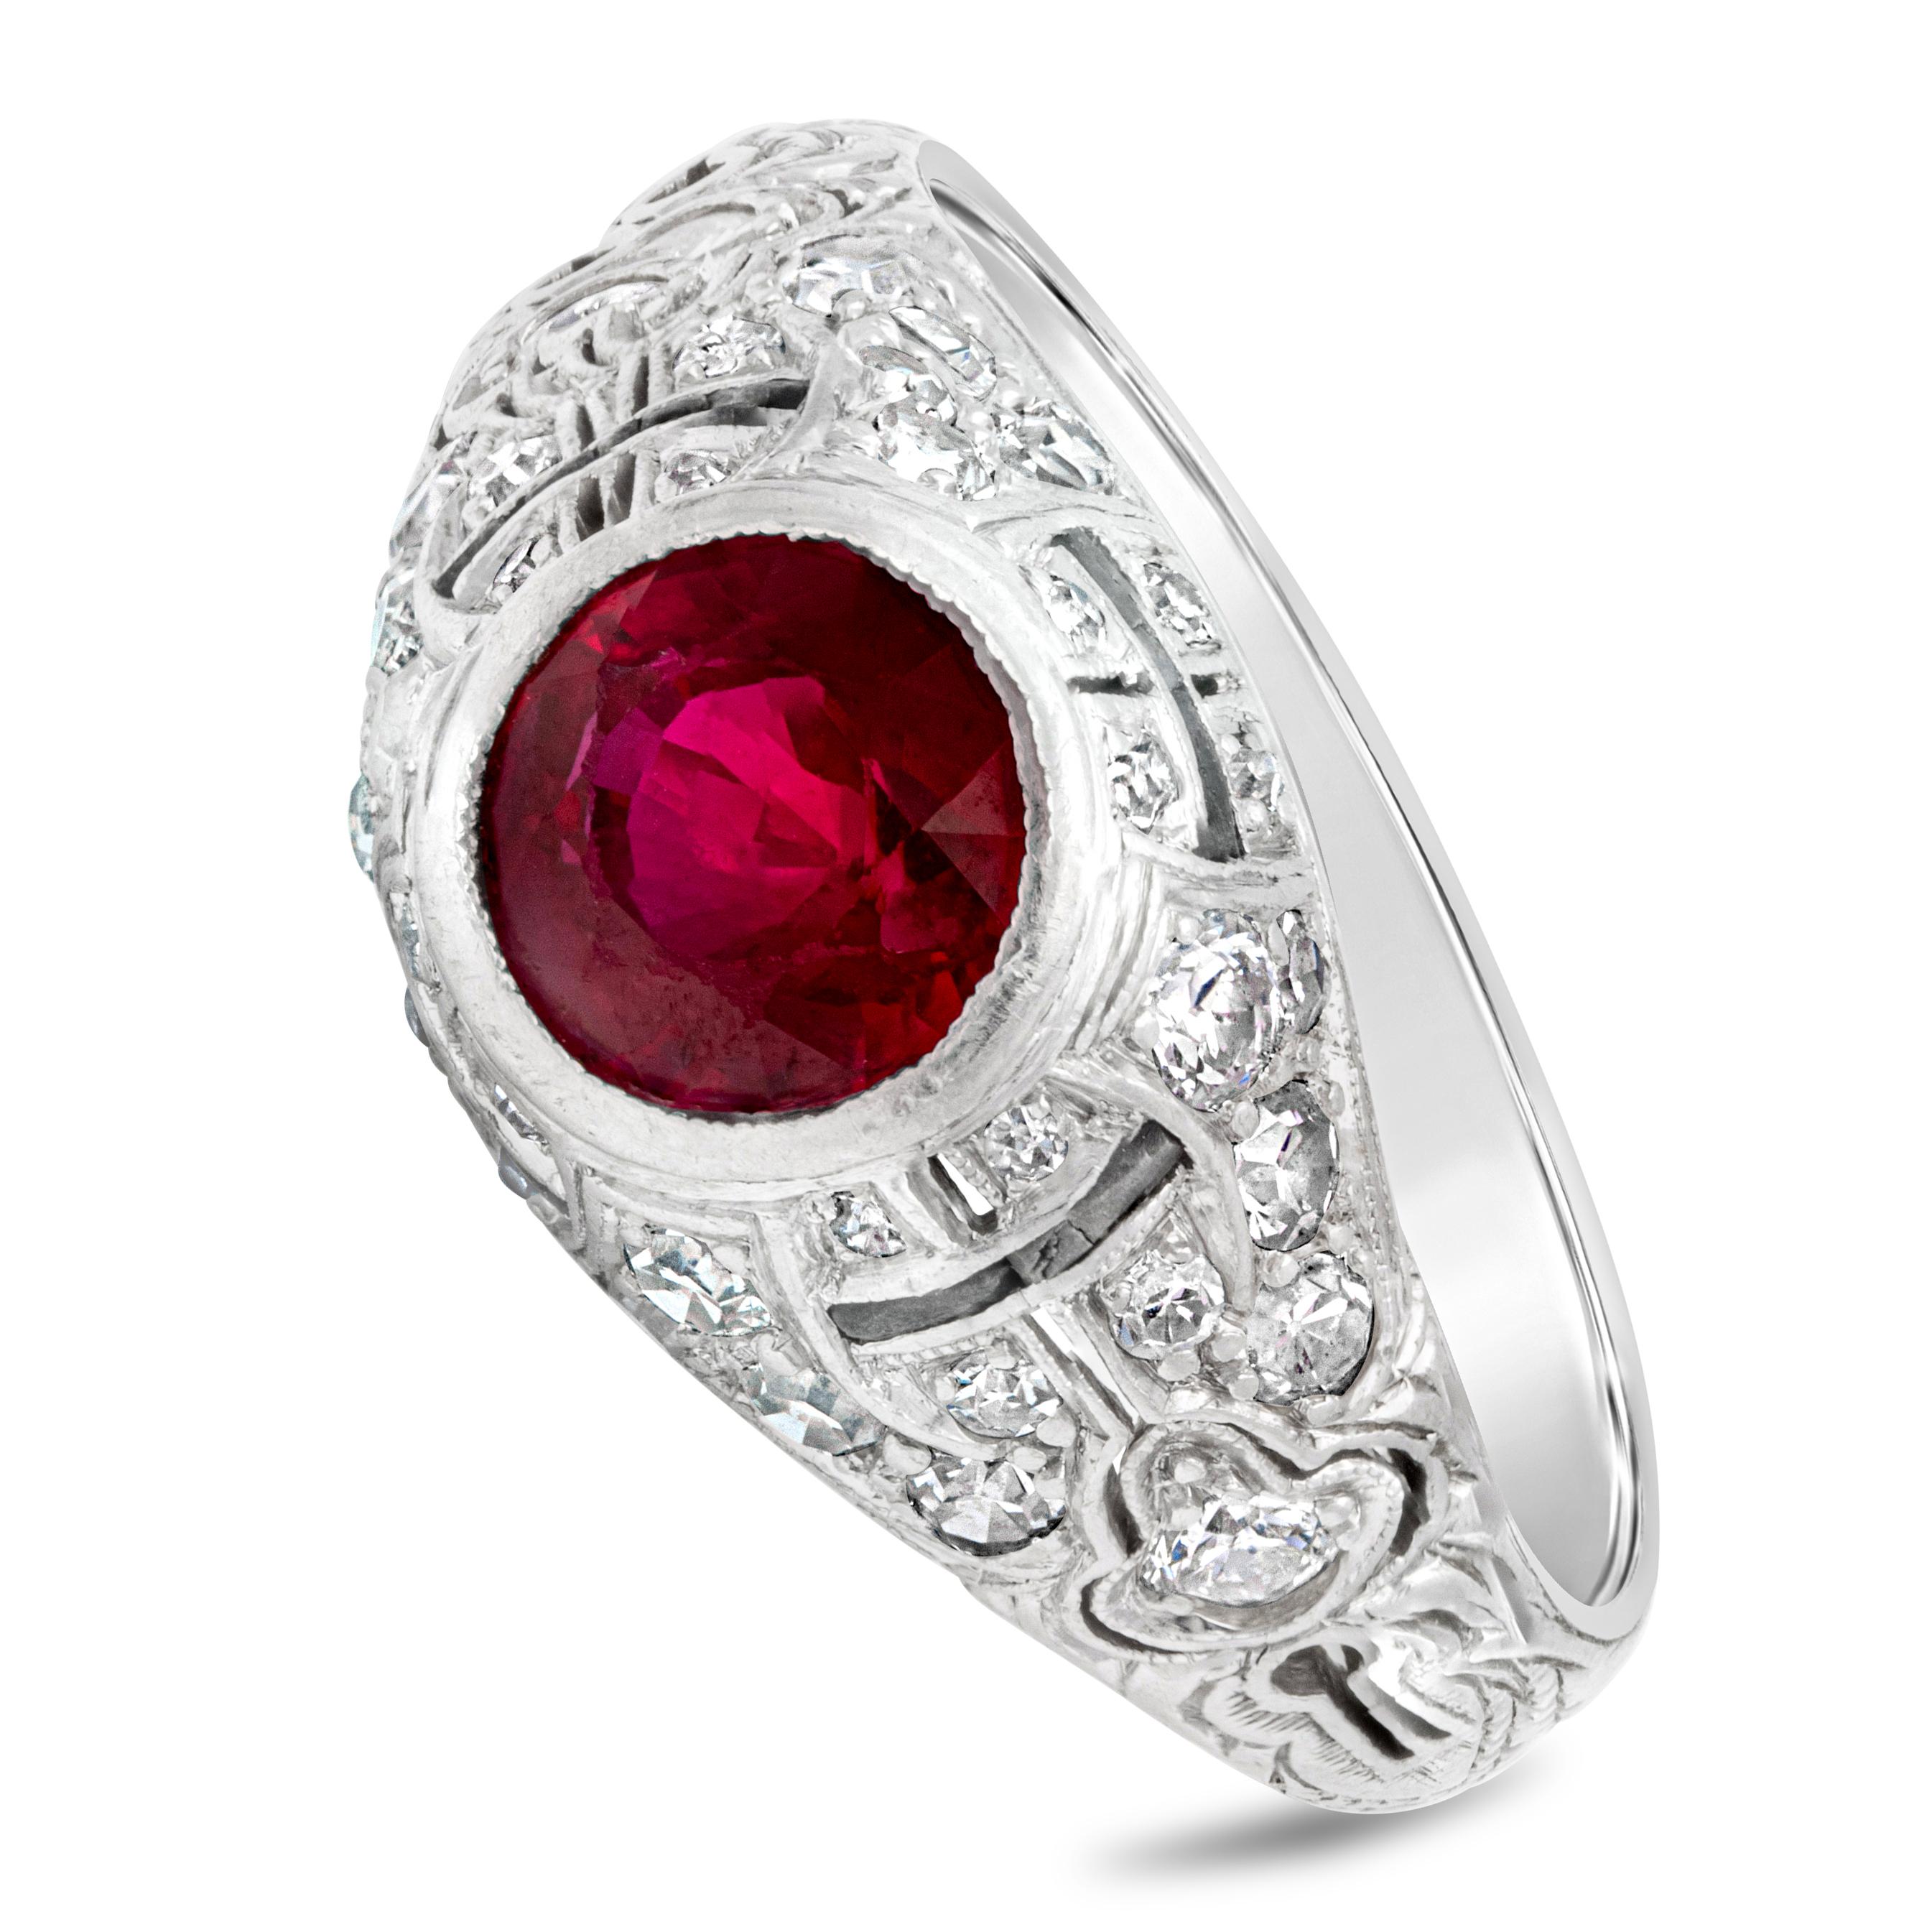 An antique piece of jewelry showcasing a GIA certified color-rich round ruby center stone weighing 1.60 carats, set in a bezel. Flanked on each side by a round diamonds weighing 1.00 carats total. Made with platinum. Size 8 US and resizable upon